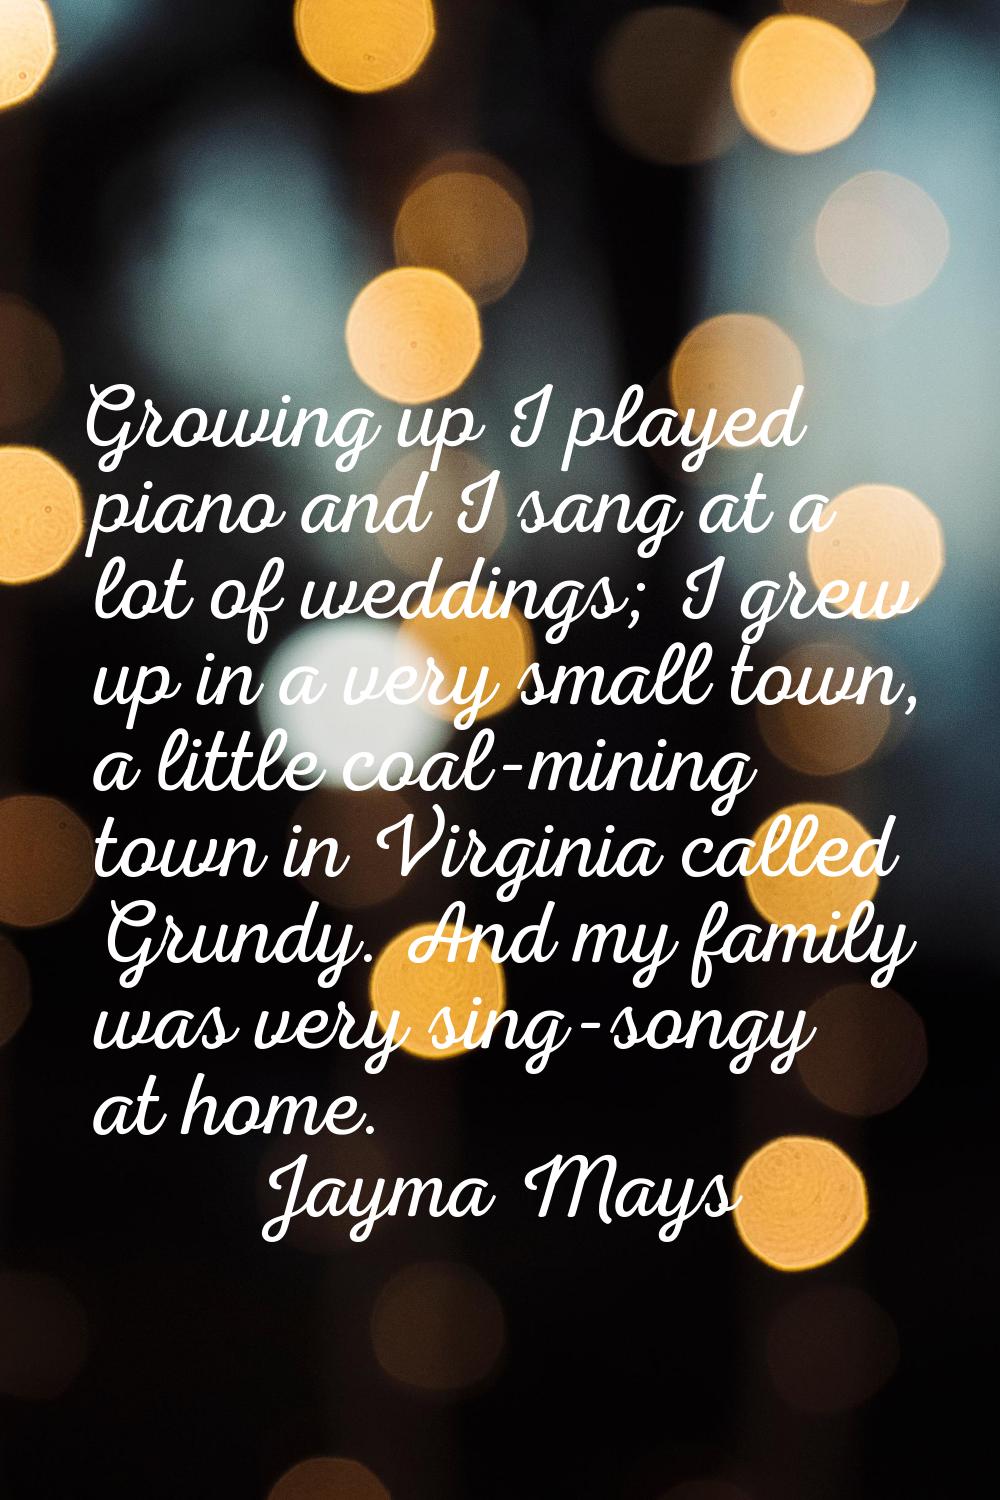 Growing up I played piano and I sang at a lot of weddings; I grew up in a very small town, a little